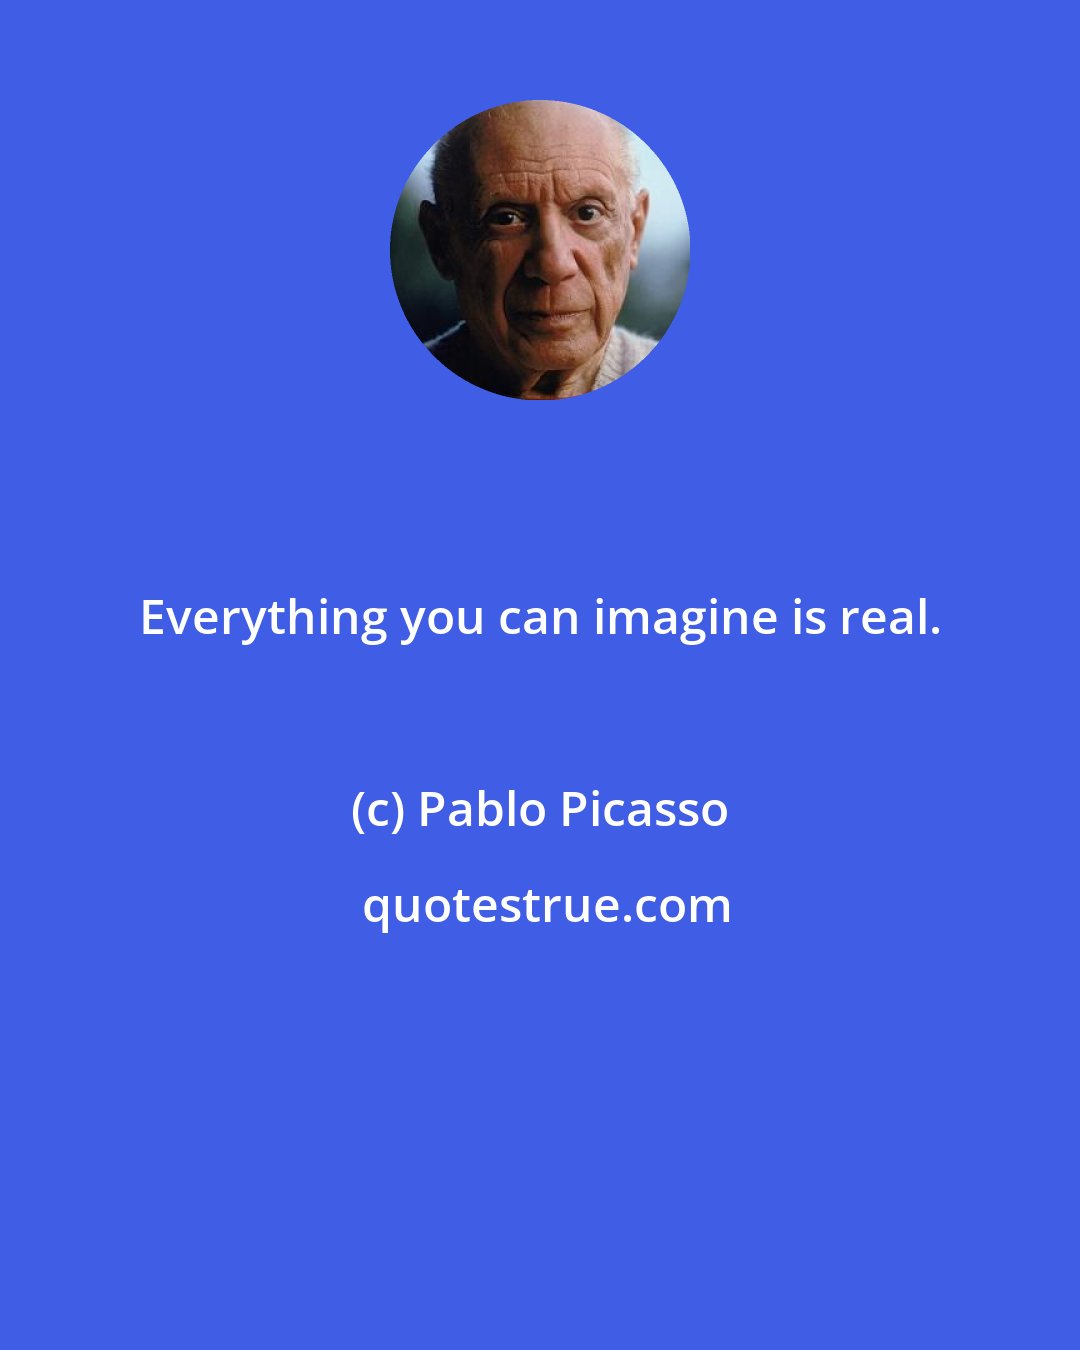 Pablo Picasso: Everything you can imagine is real.